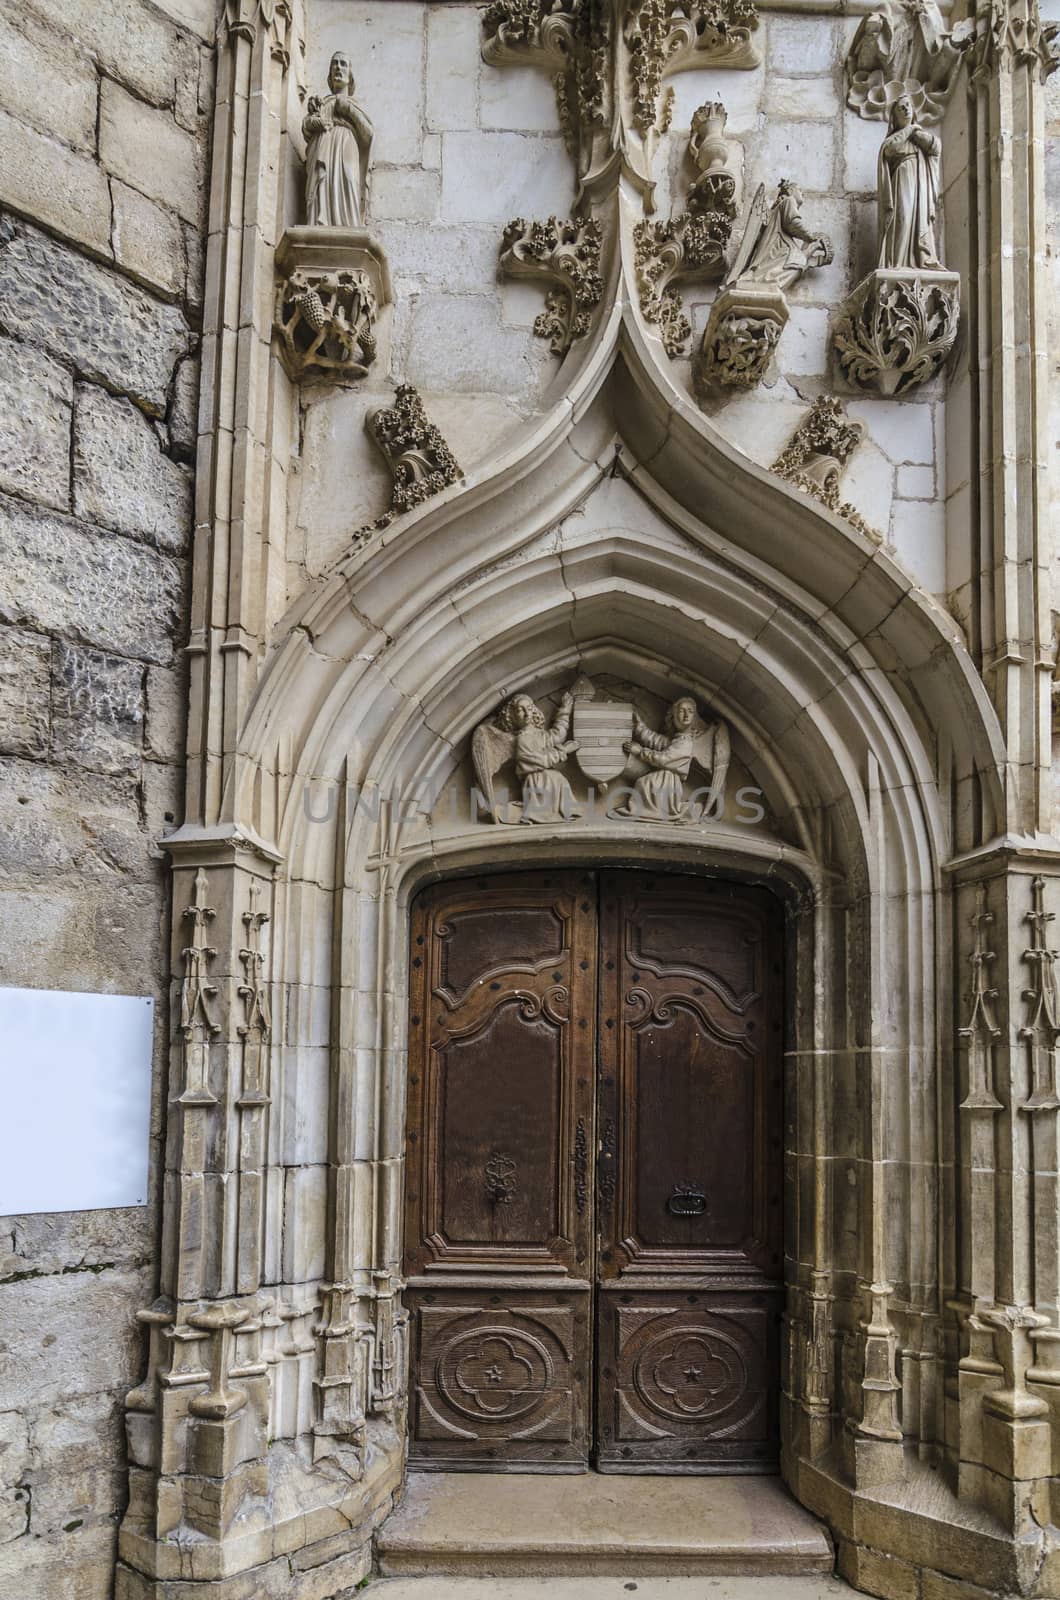 Details at the entrance to the chapel of rocamadour by MAEKFOTO